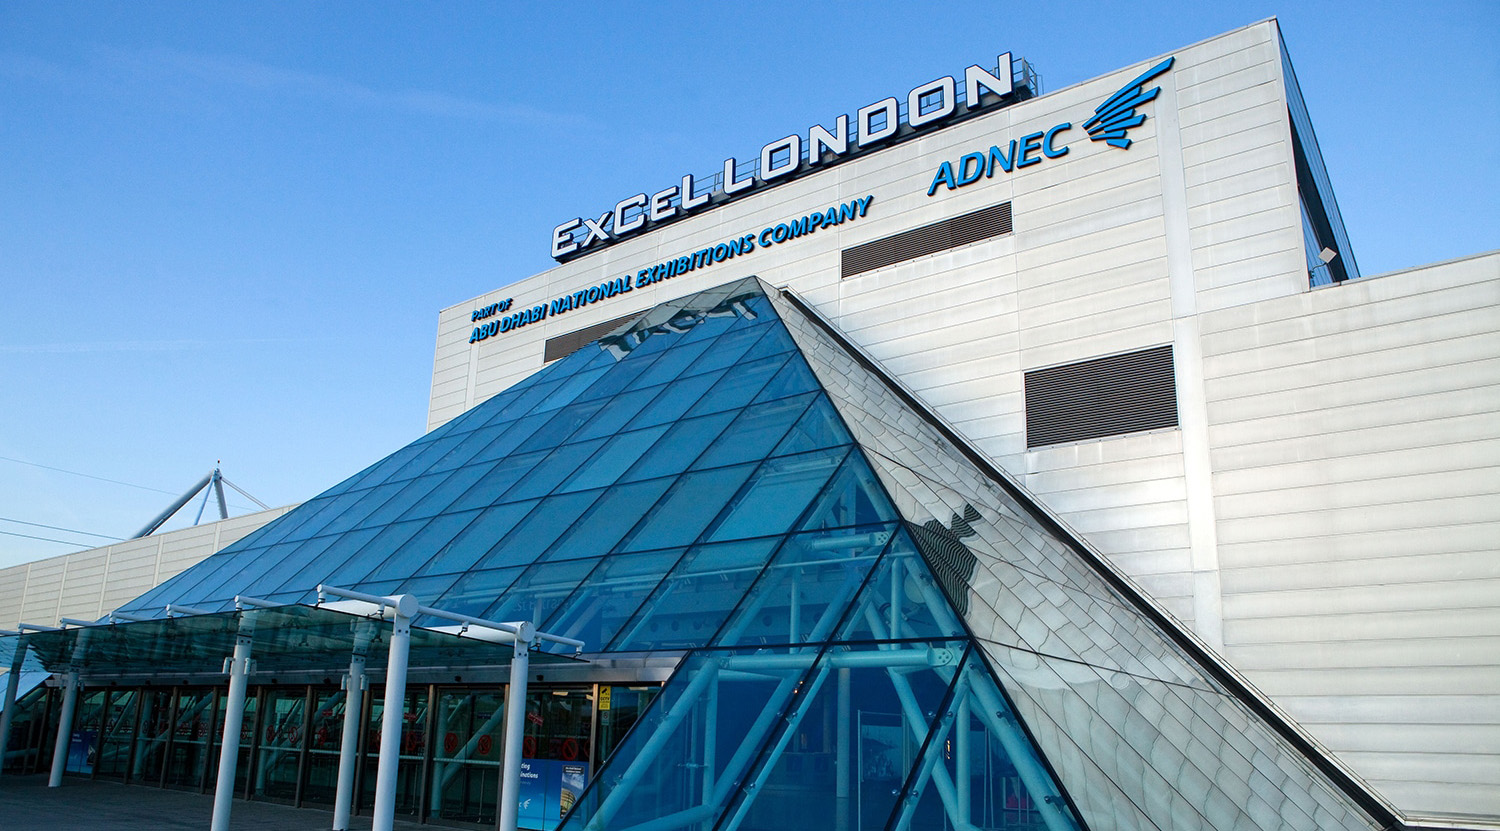 External view of ExCel conference centre in London